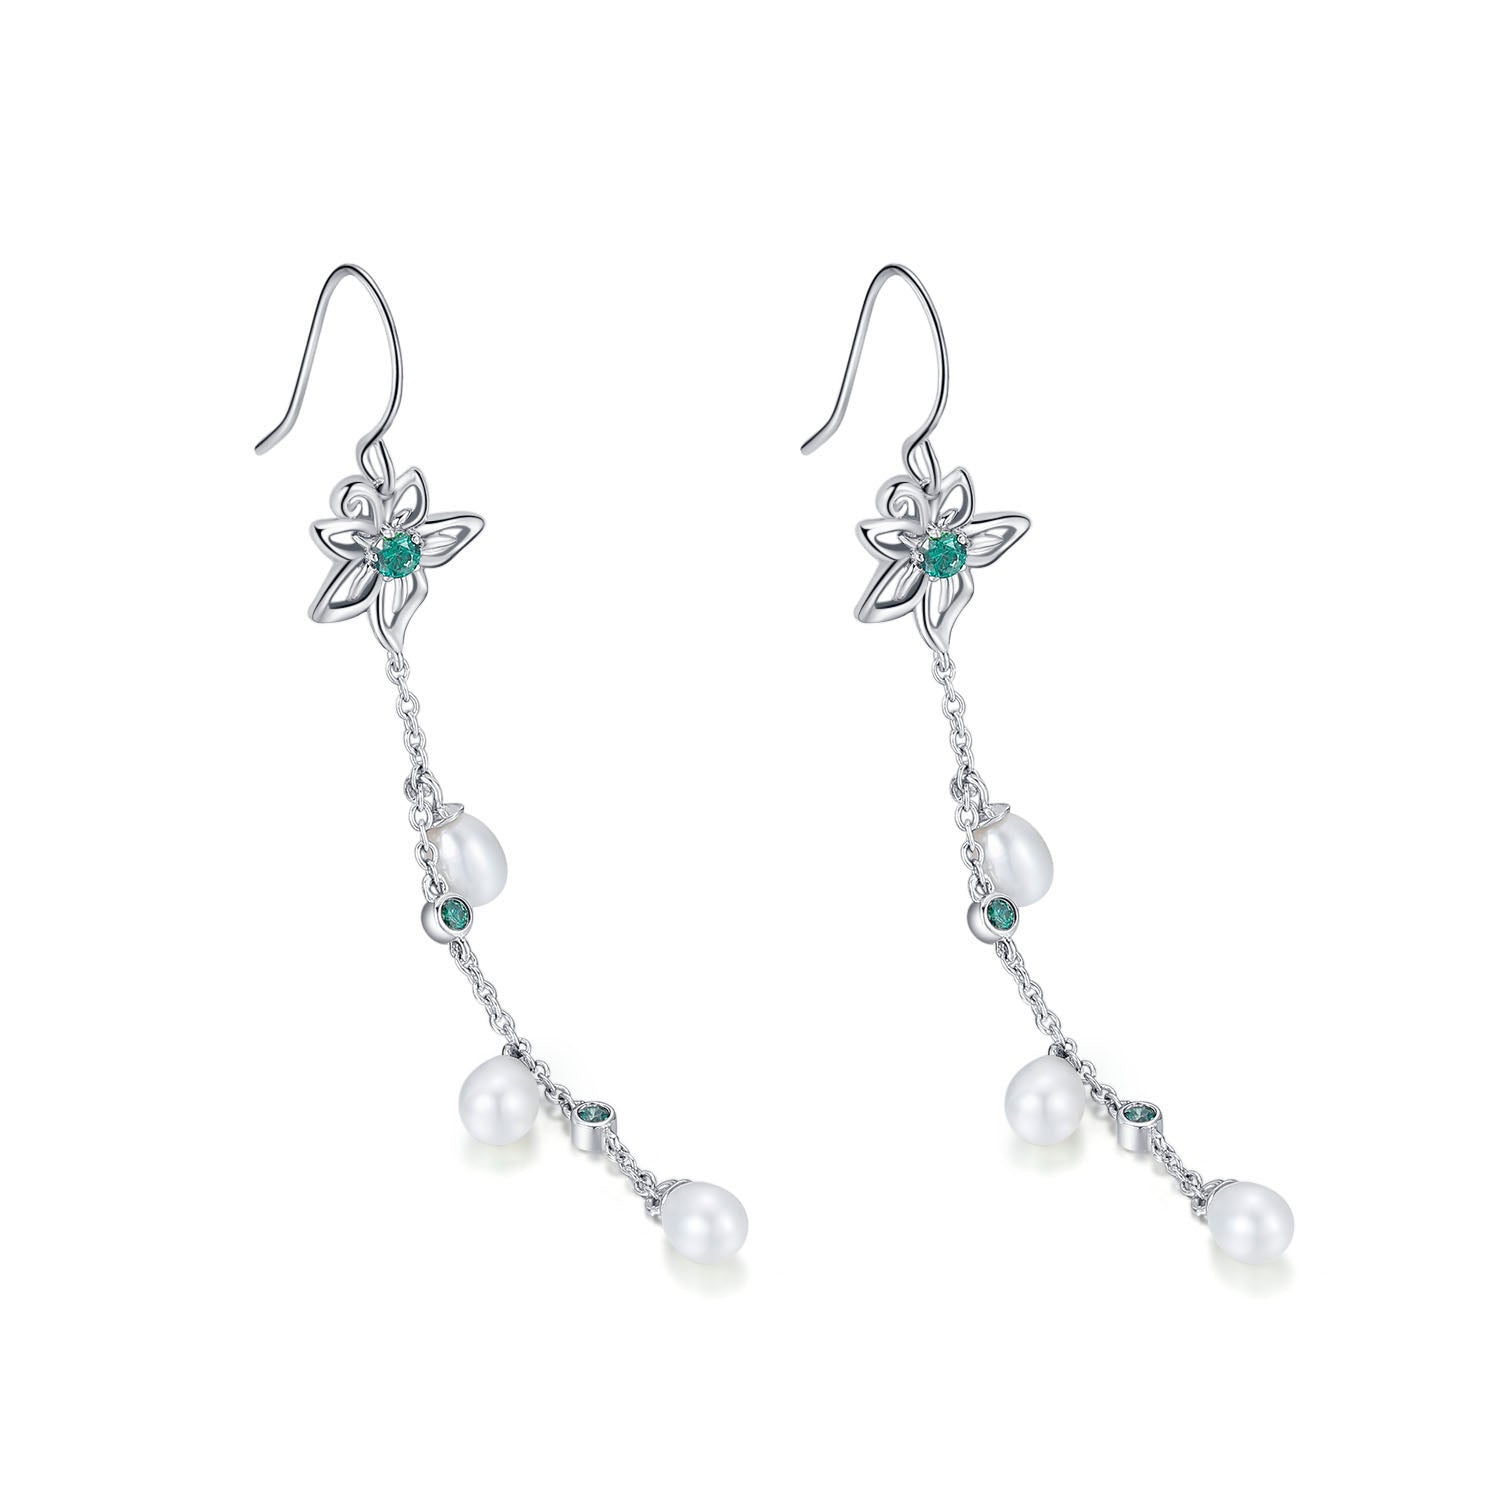 Vicacci 925 Silver Bauhinia Lotus Seed Earrings with Swarovski Green Crystals